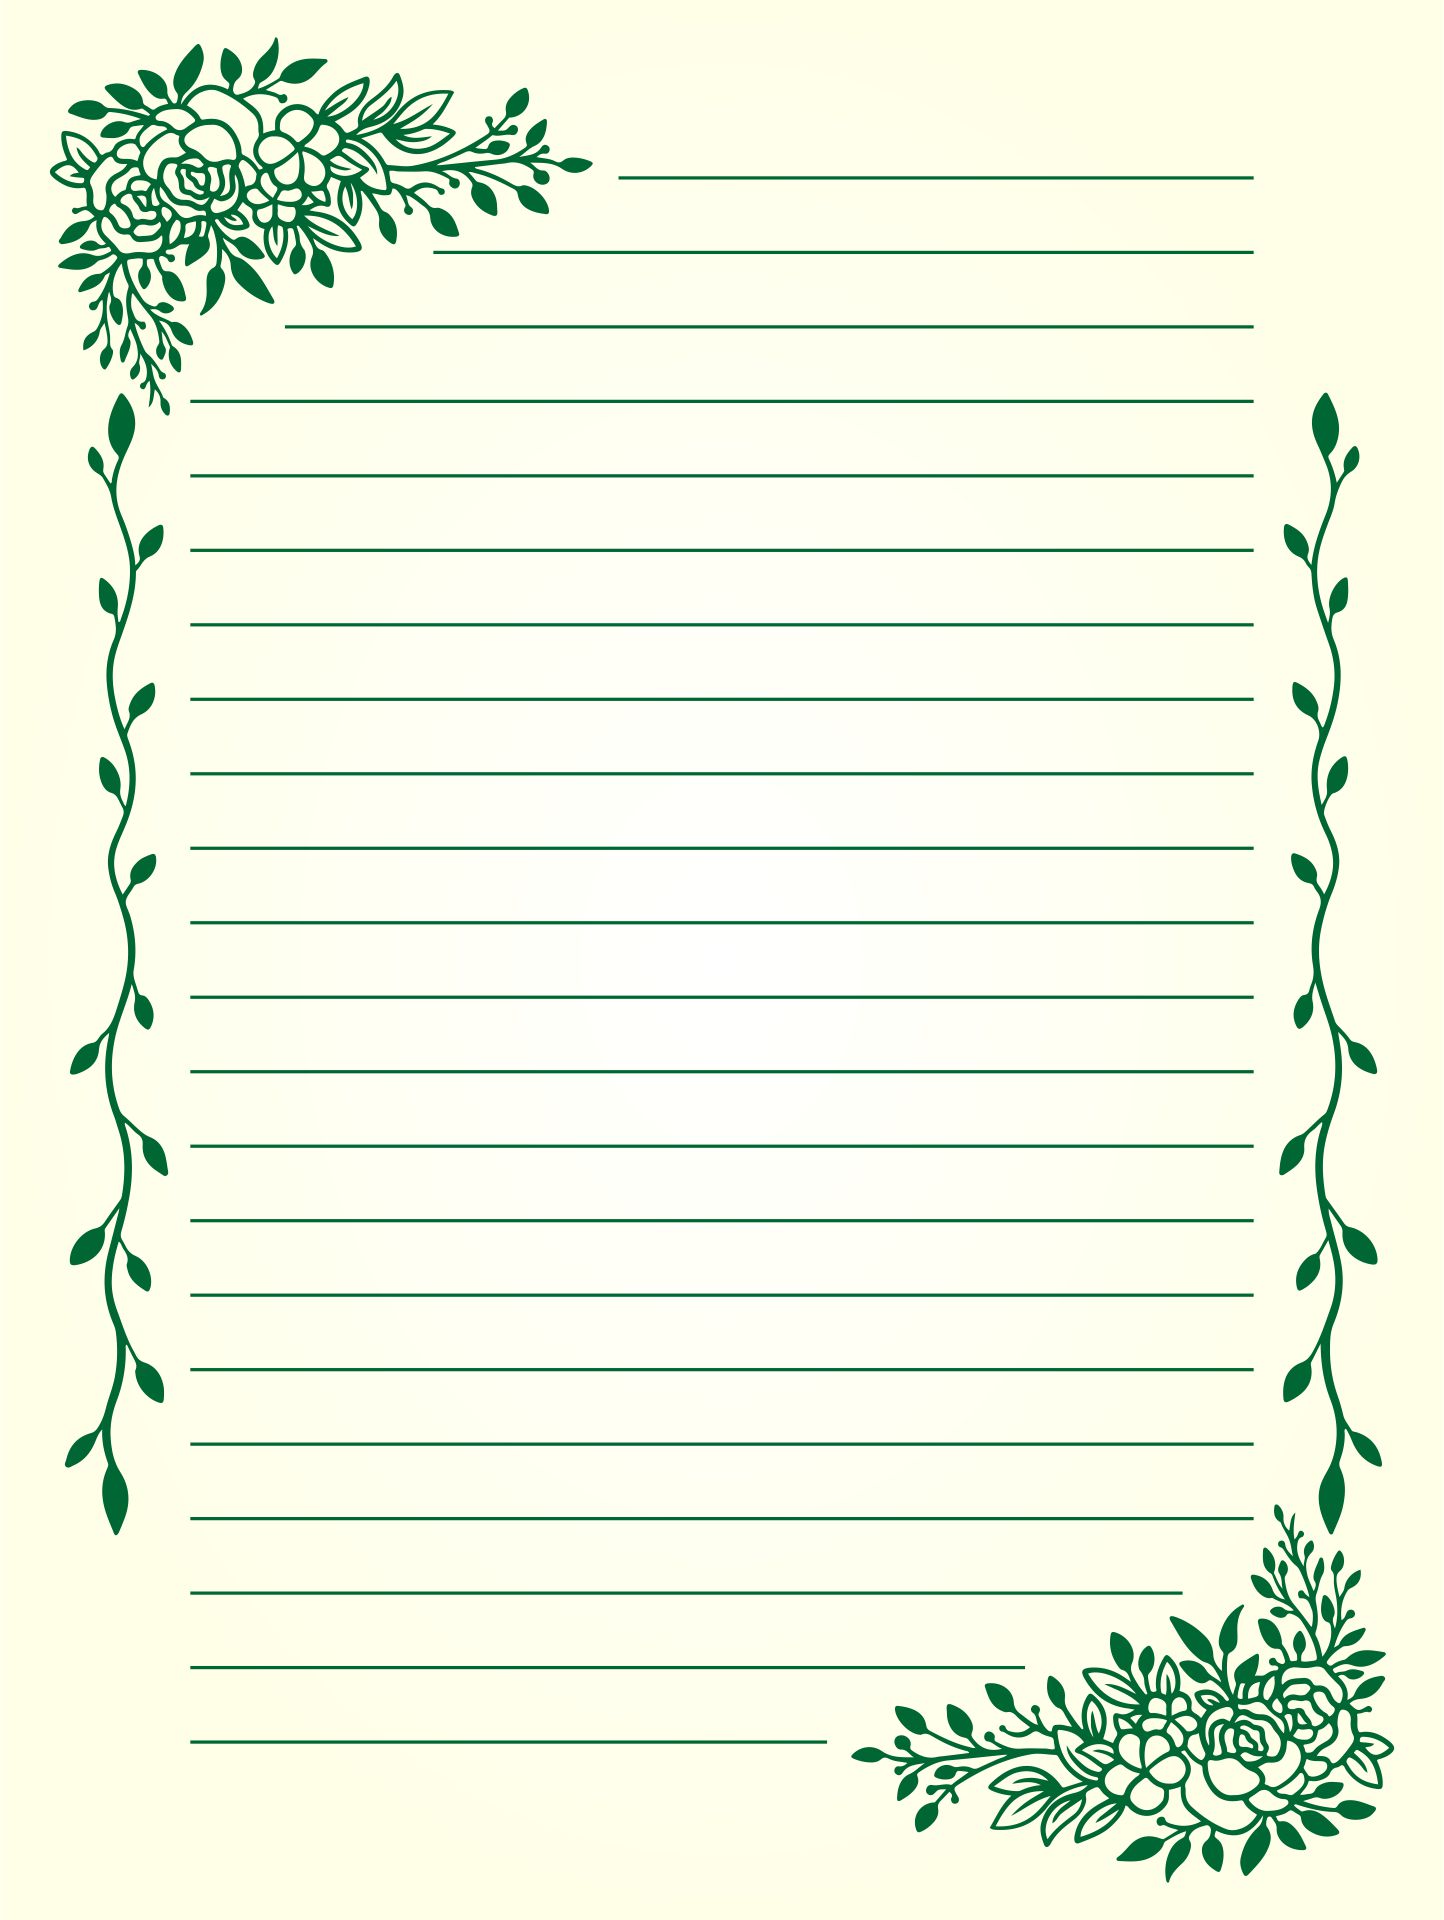 printable-stationary-with-lines-free-printable-templates